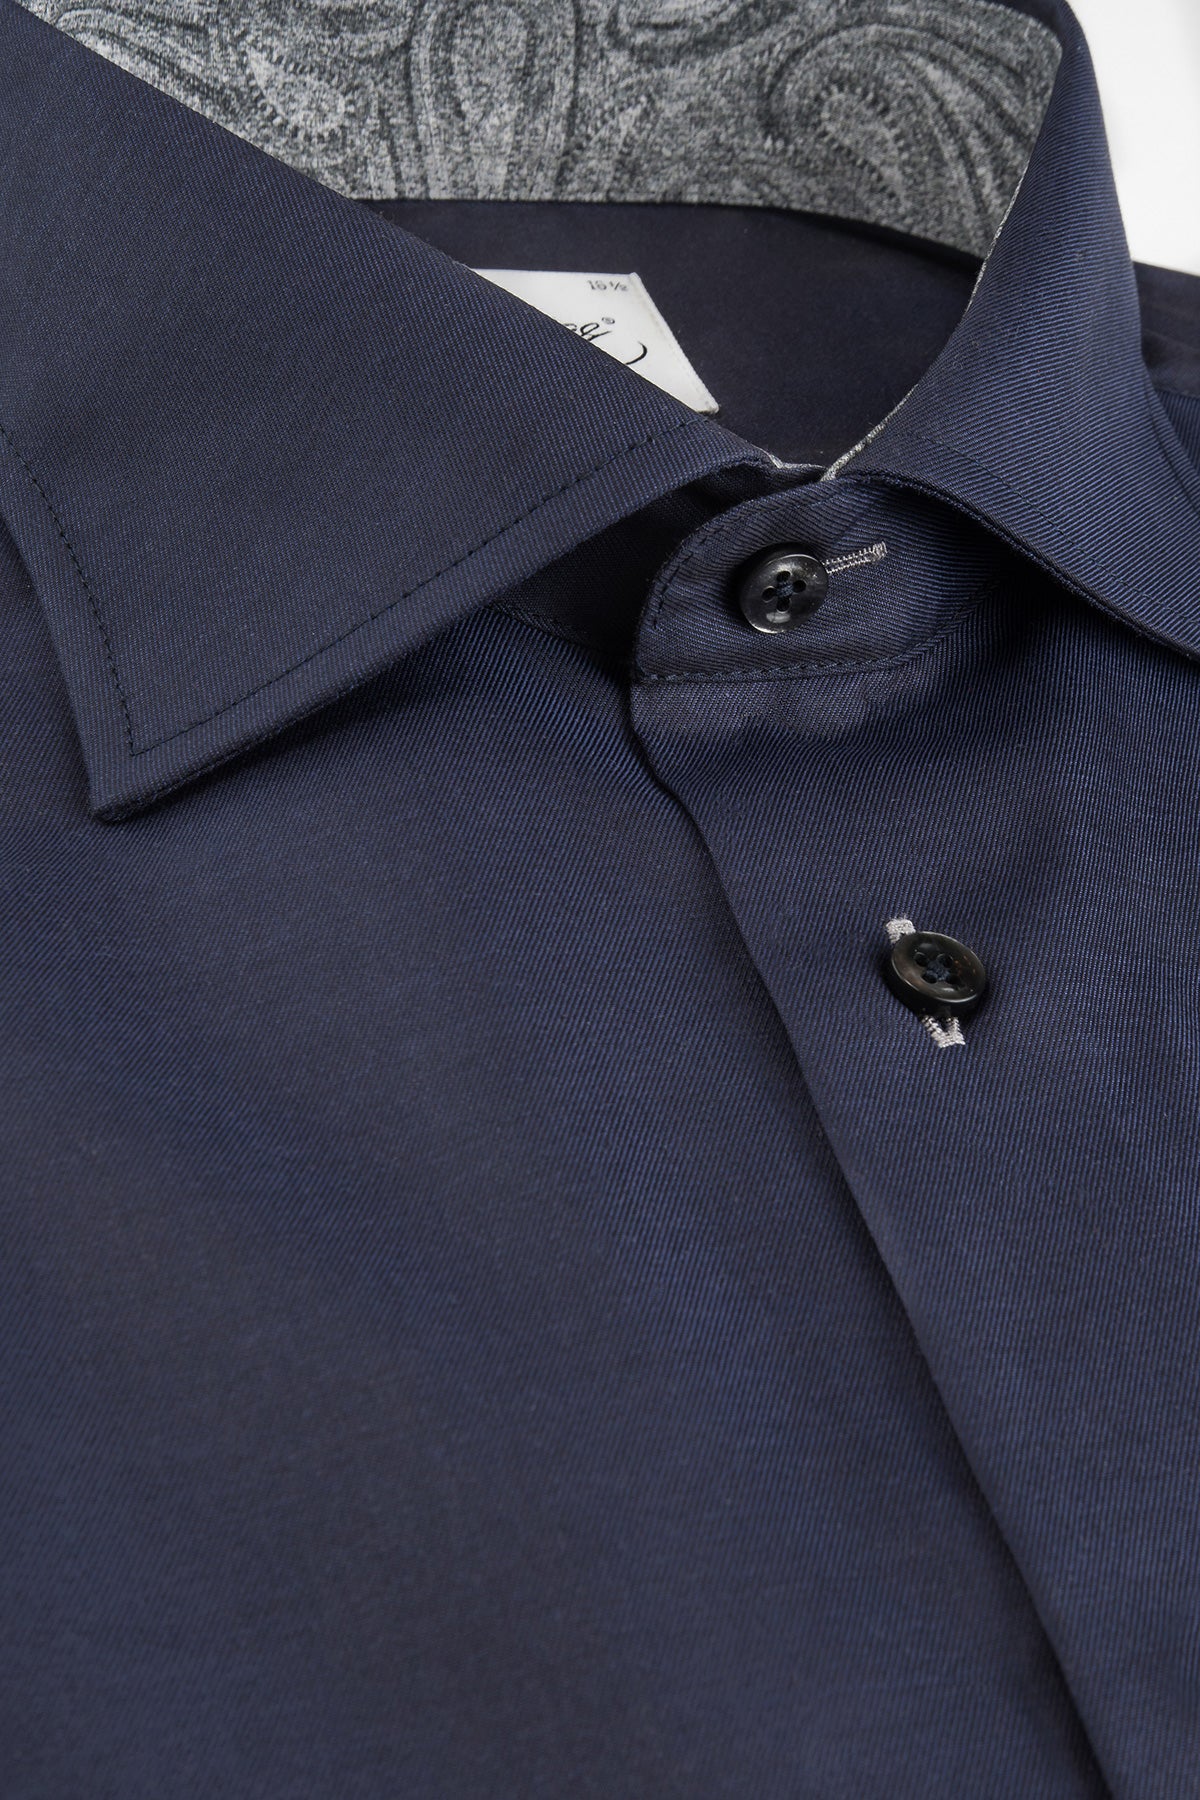 Navy blue slim fit shirt with grey contrast details